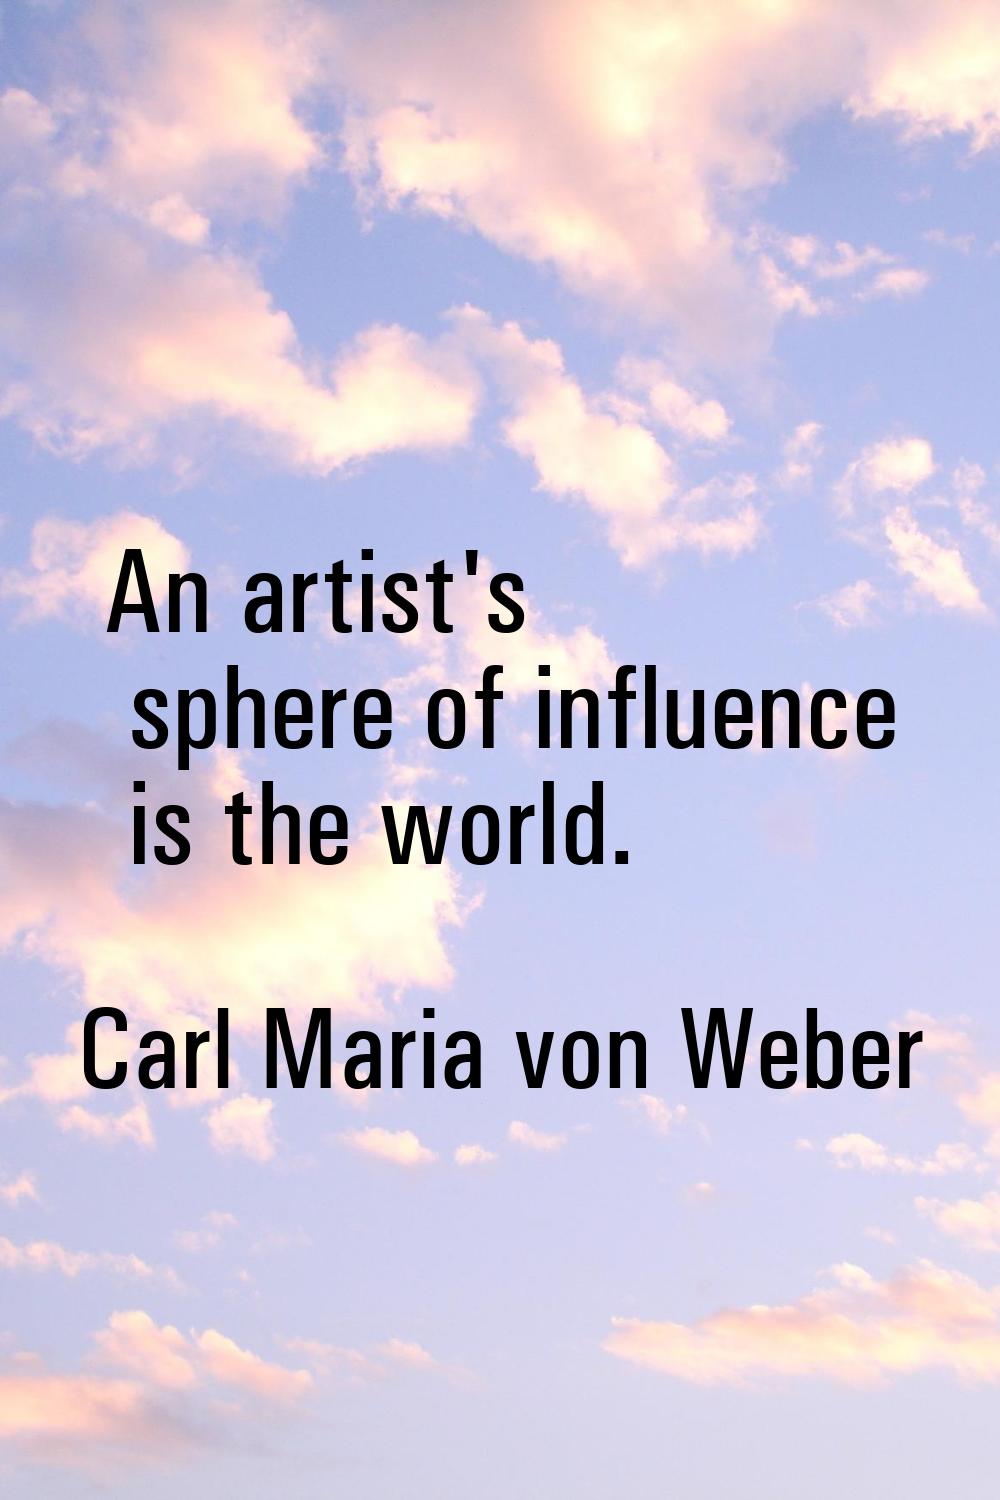 An artist's sphere of influence is the world.